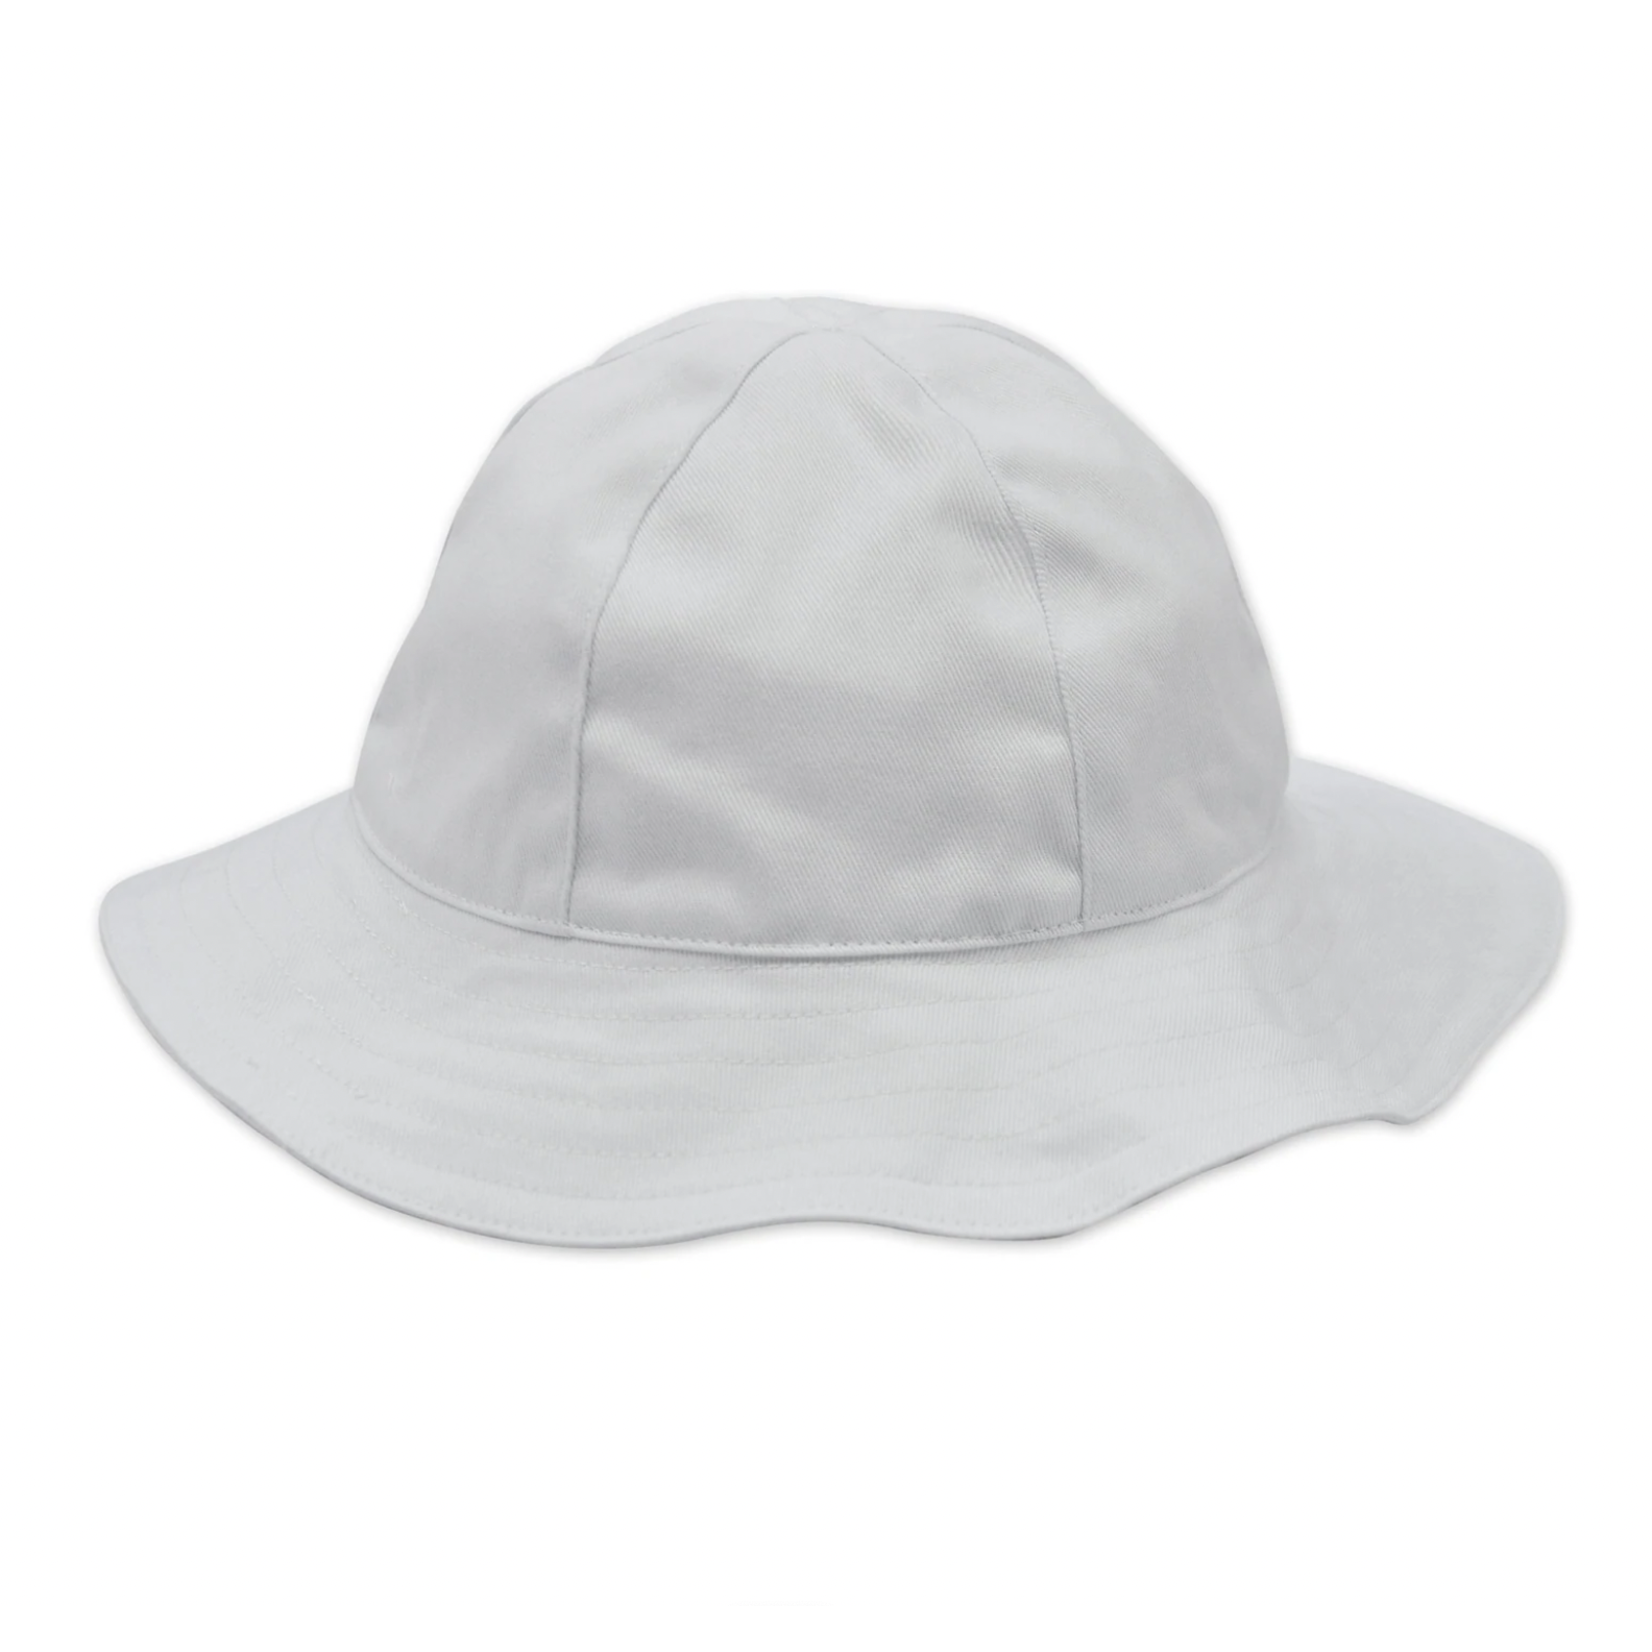 Busy Bees Kids Baby White Twill Sun Hat